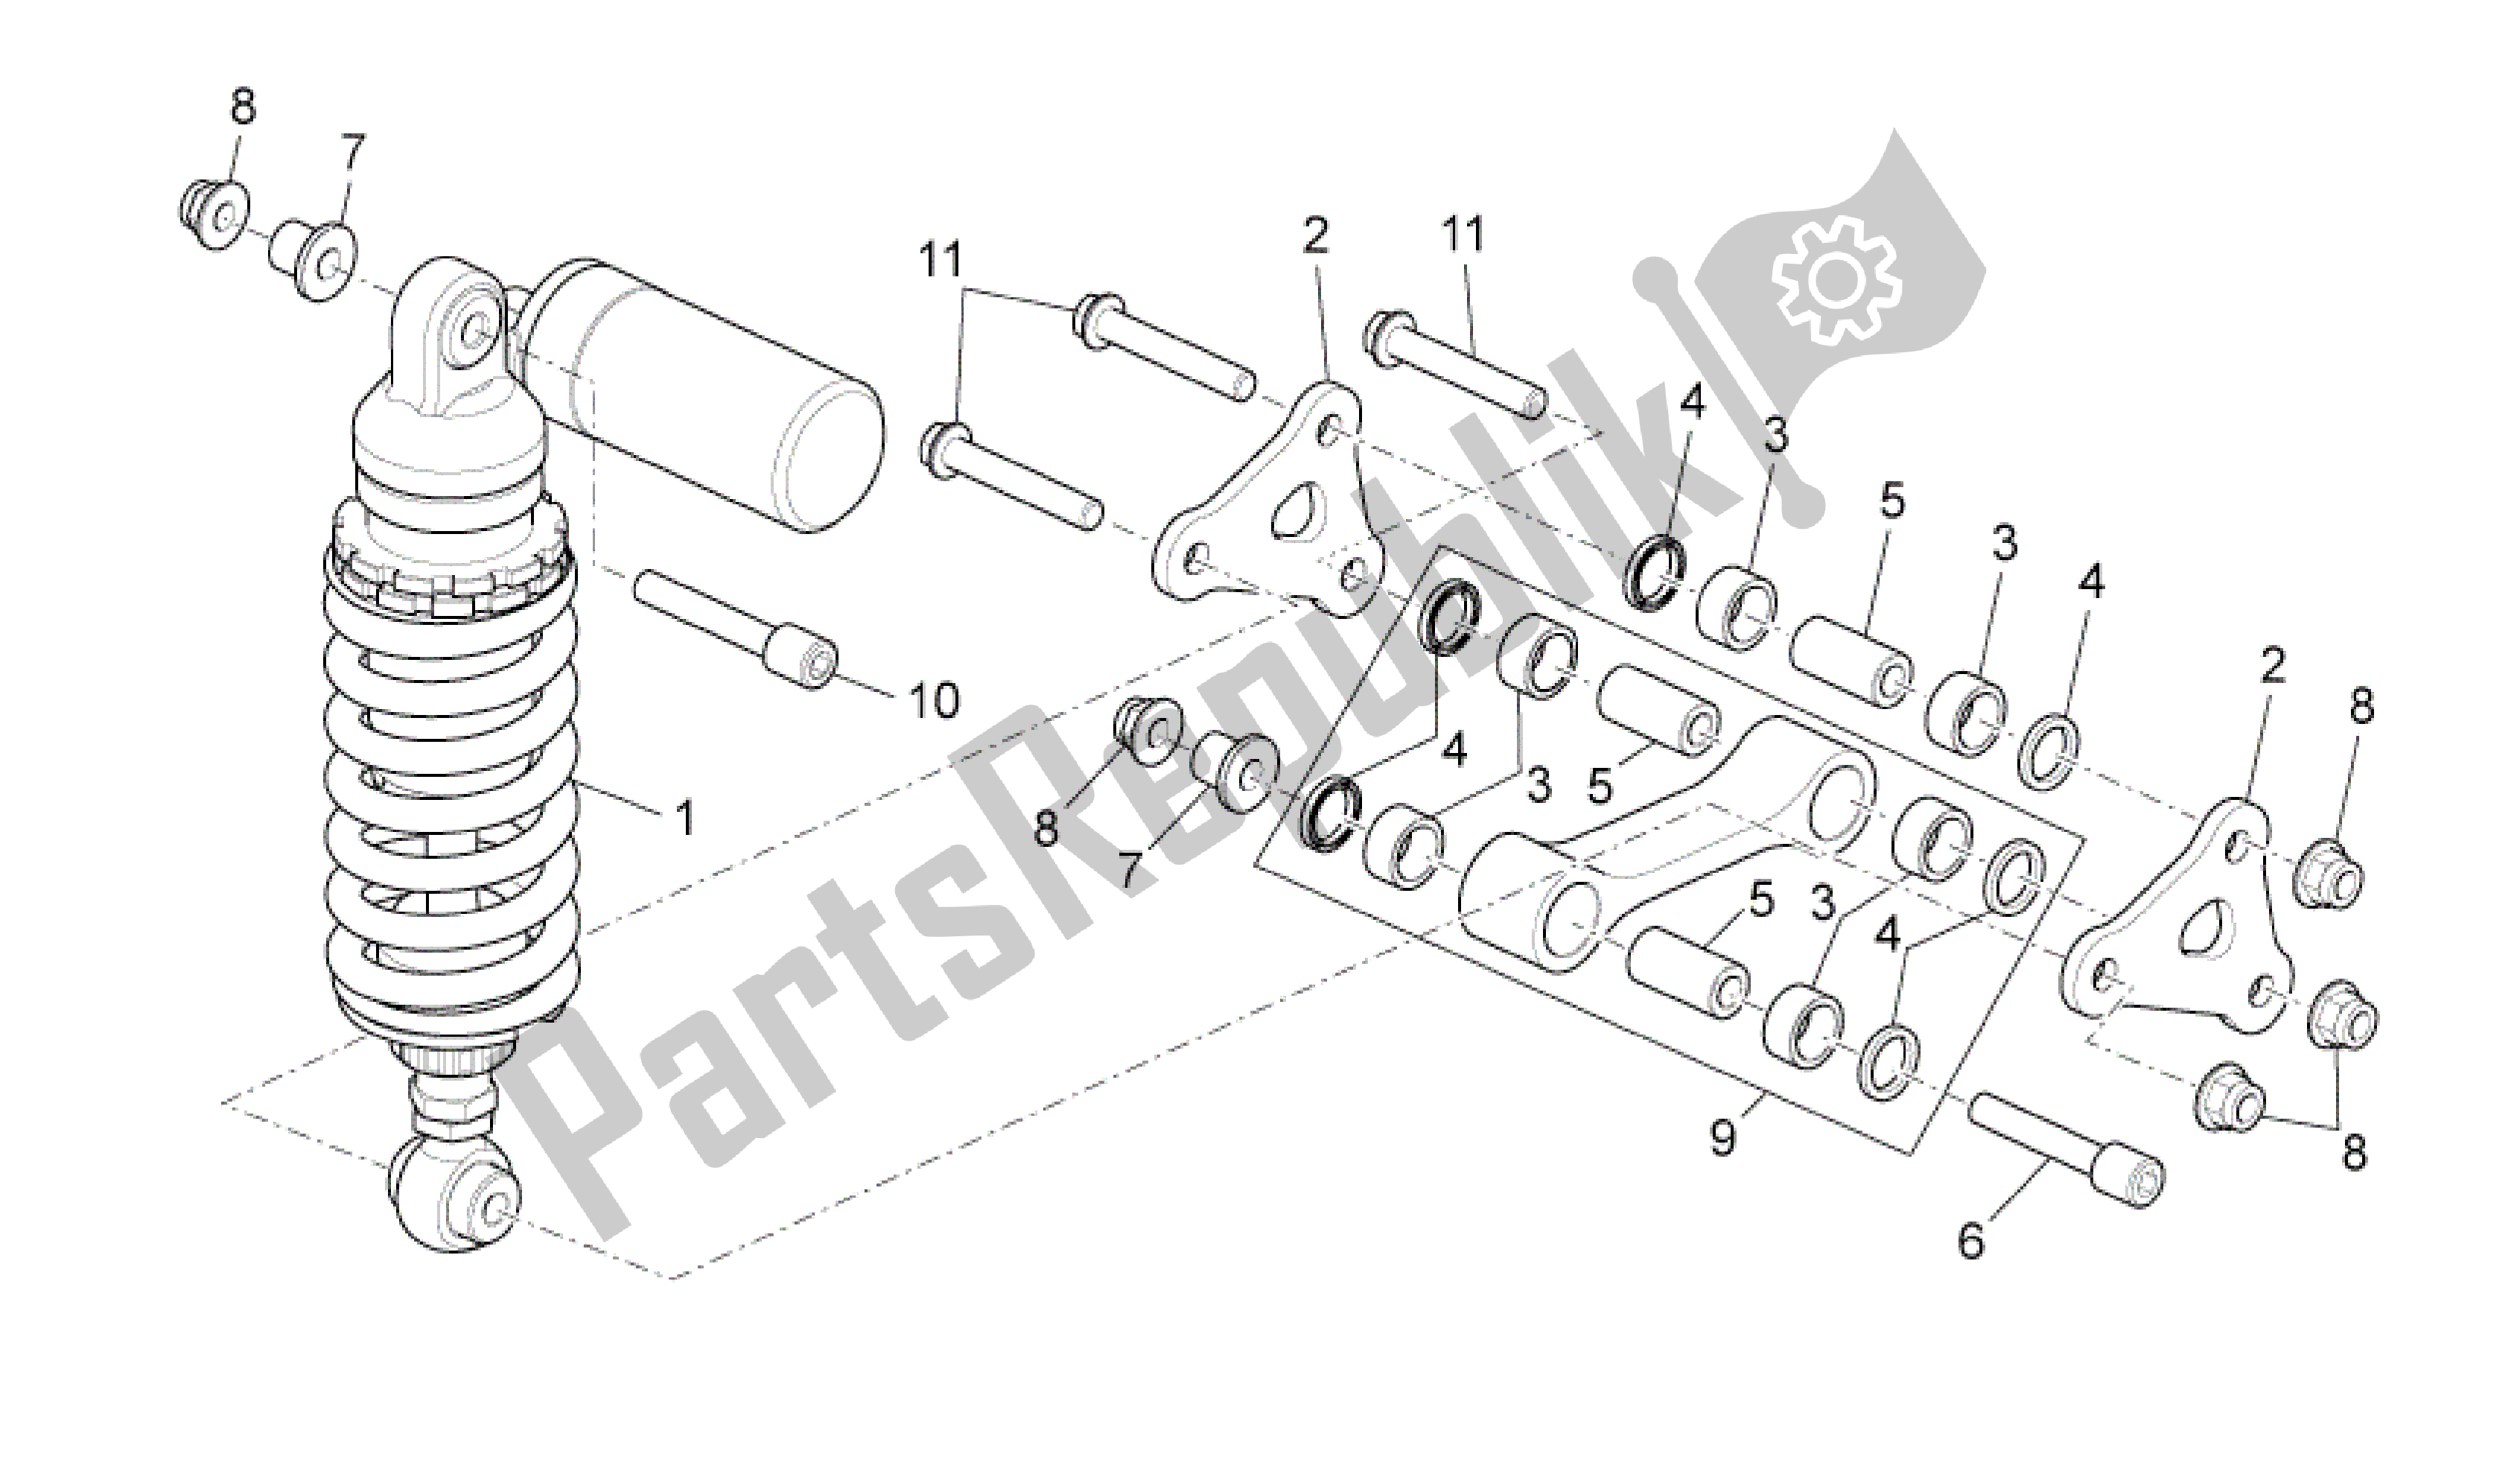 All parts for the Rear Shock Absorber of the Aprilia RSV4 Tuono V4 R Aprc ABS 1000 2014